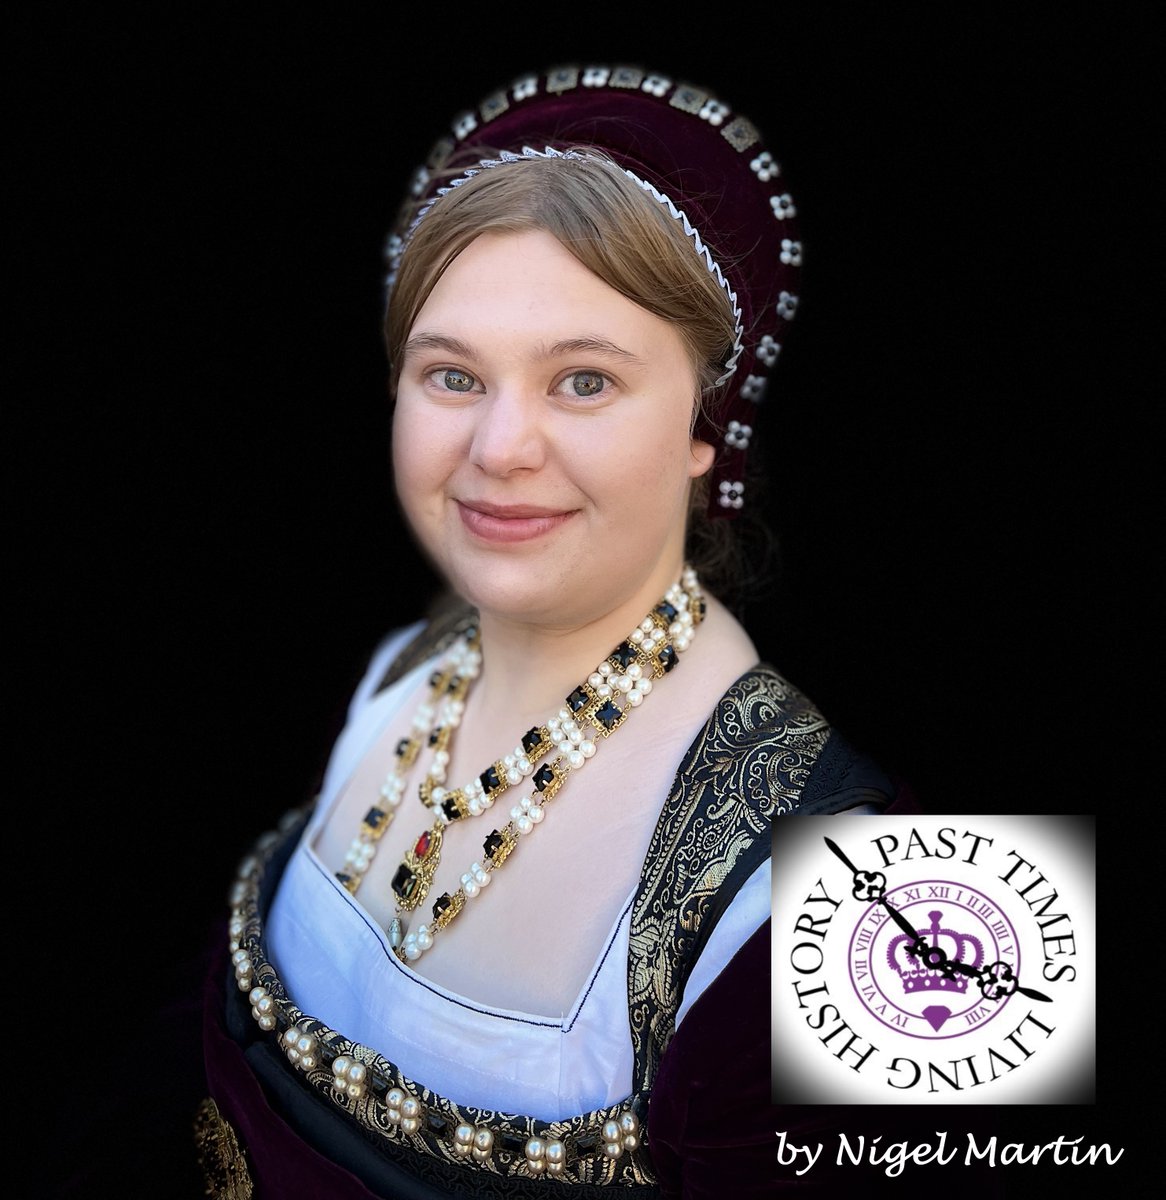 #OTD 4 June 1536 #JaneSeymour was proclaimed Queen at Greenwich Palace 
Never crowned, her coronation was delayed as plague was rife in London ... maybe Henry planned to wait for her to deliver him an heir first!
Jane's story free to view on PTLH TV: youtube.com/playlist?list=…